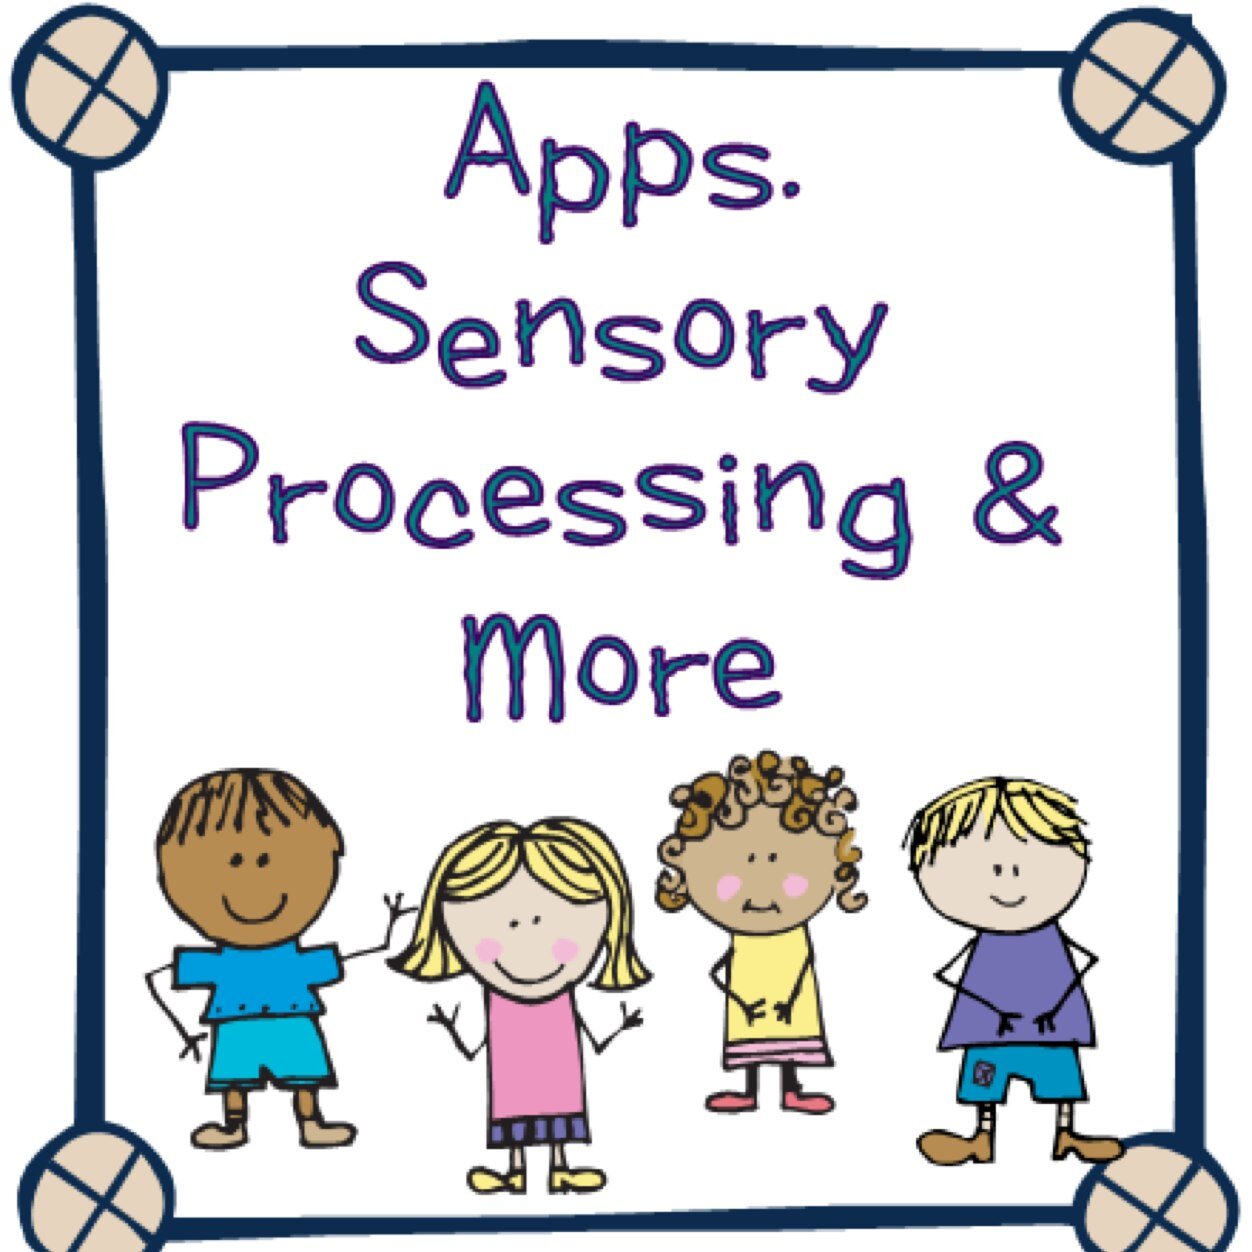 Recently retired from OT, continuing with my interests in apps, sensory processing and other topics related to children's growth and development.